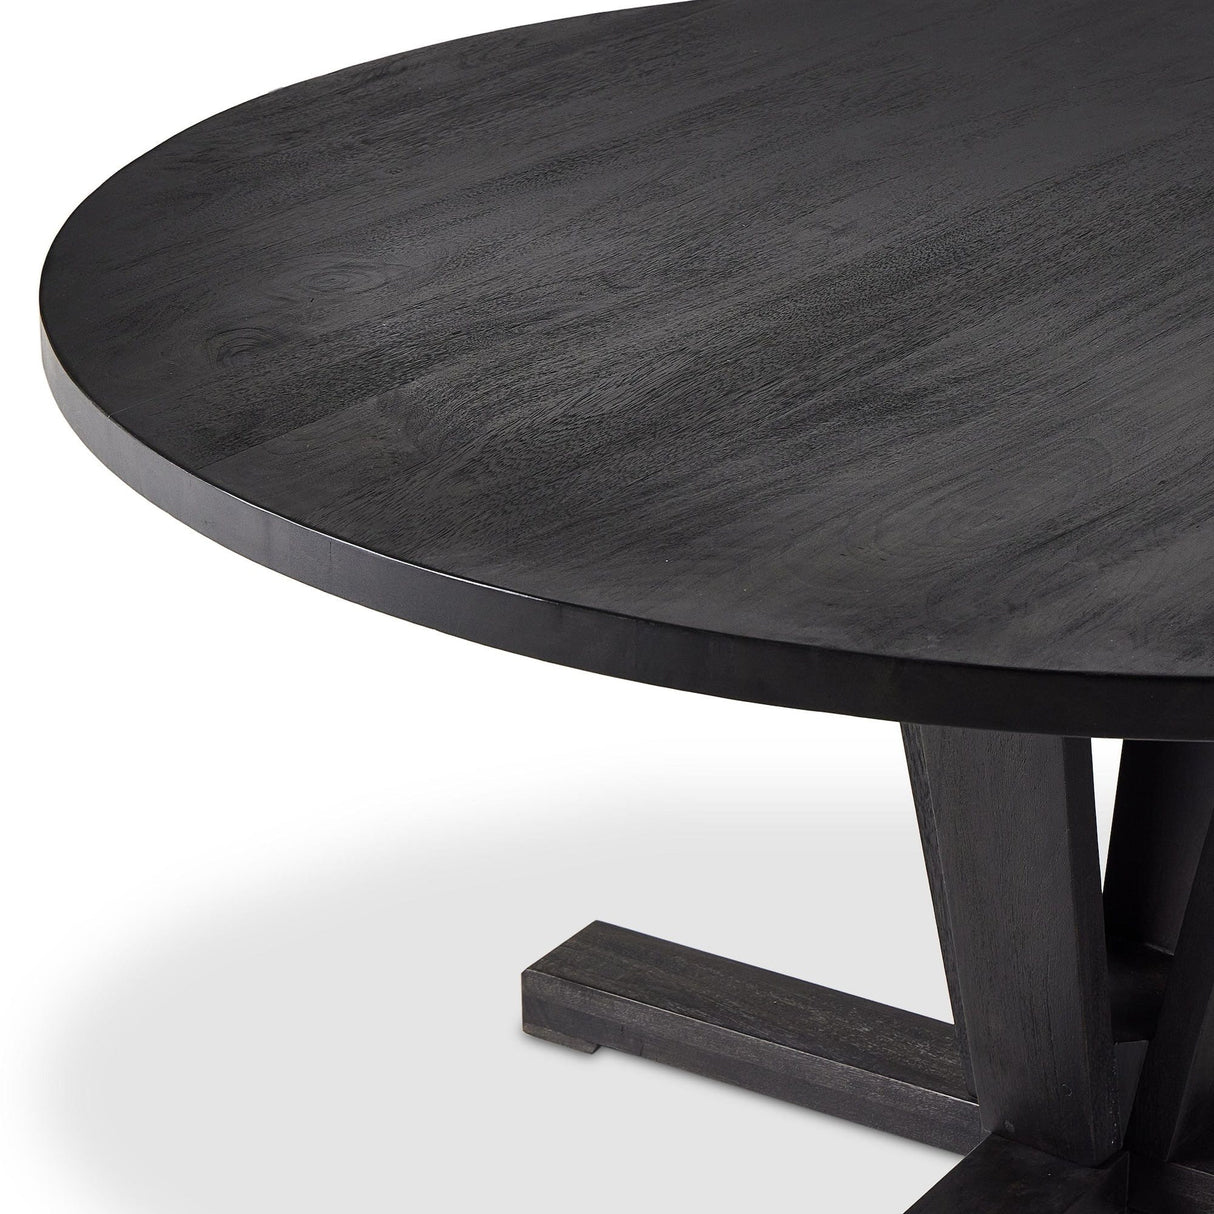 Four Hands Cobain Dining Table Dining Tables